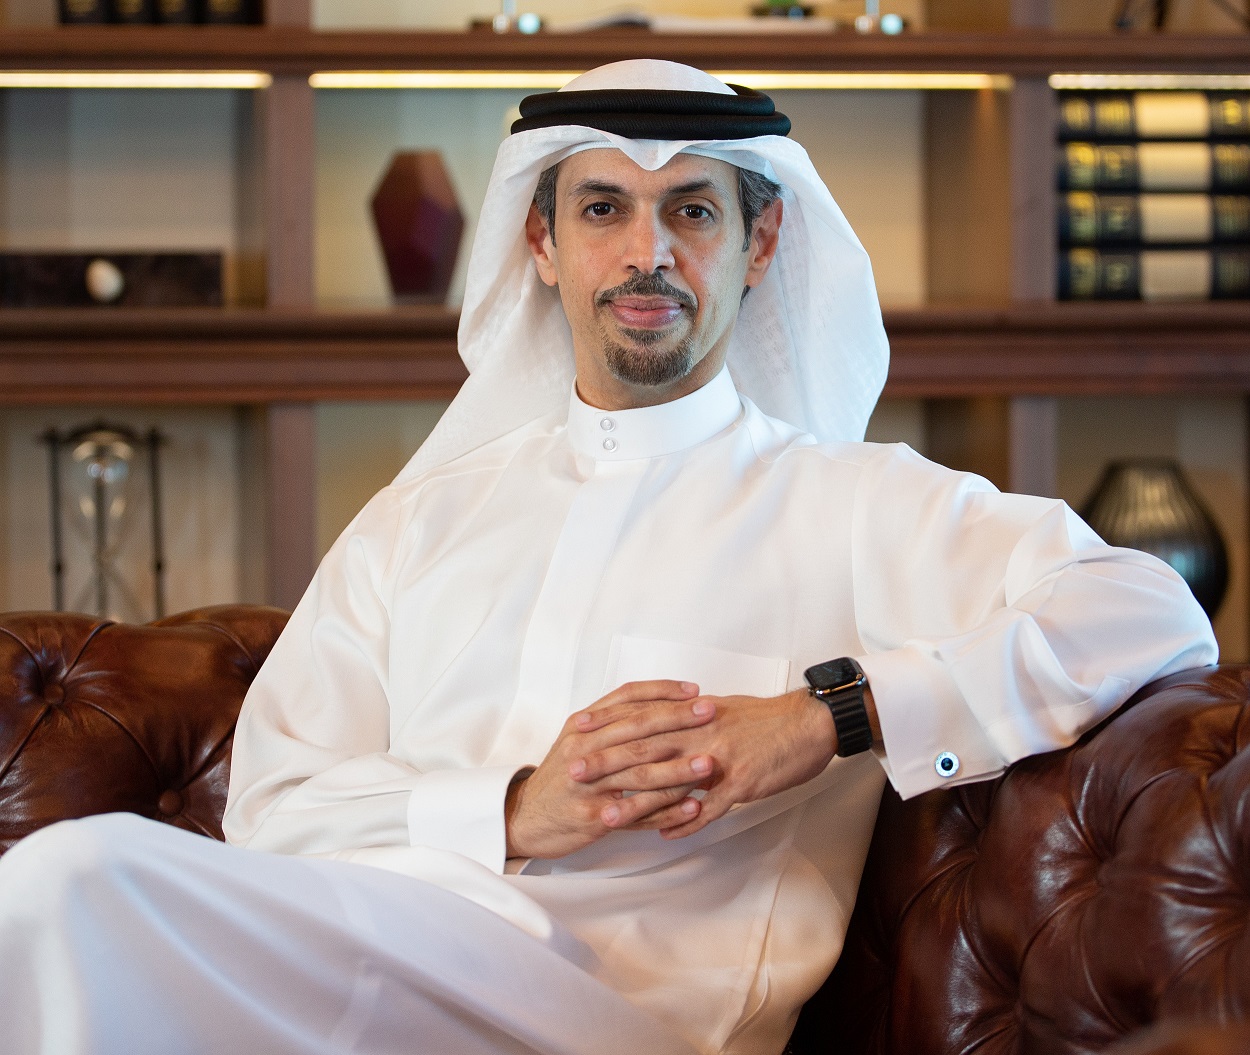 Dubai Chamber of Commerce sees AED 11 million in cost savings from paperless strategy